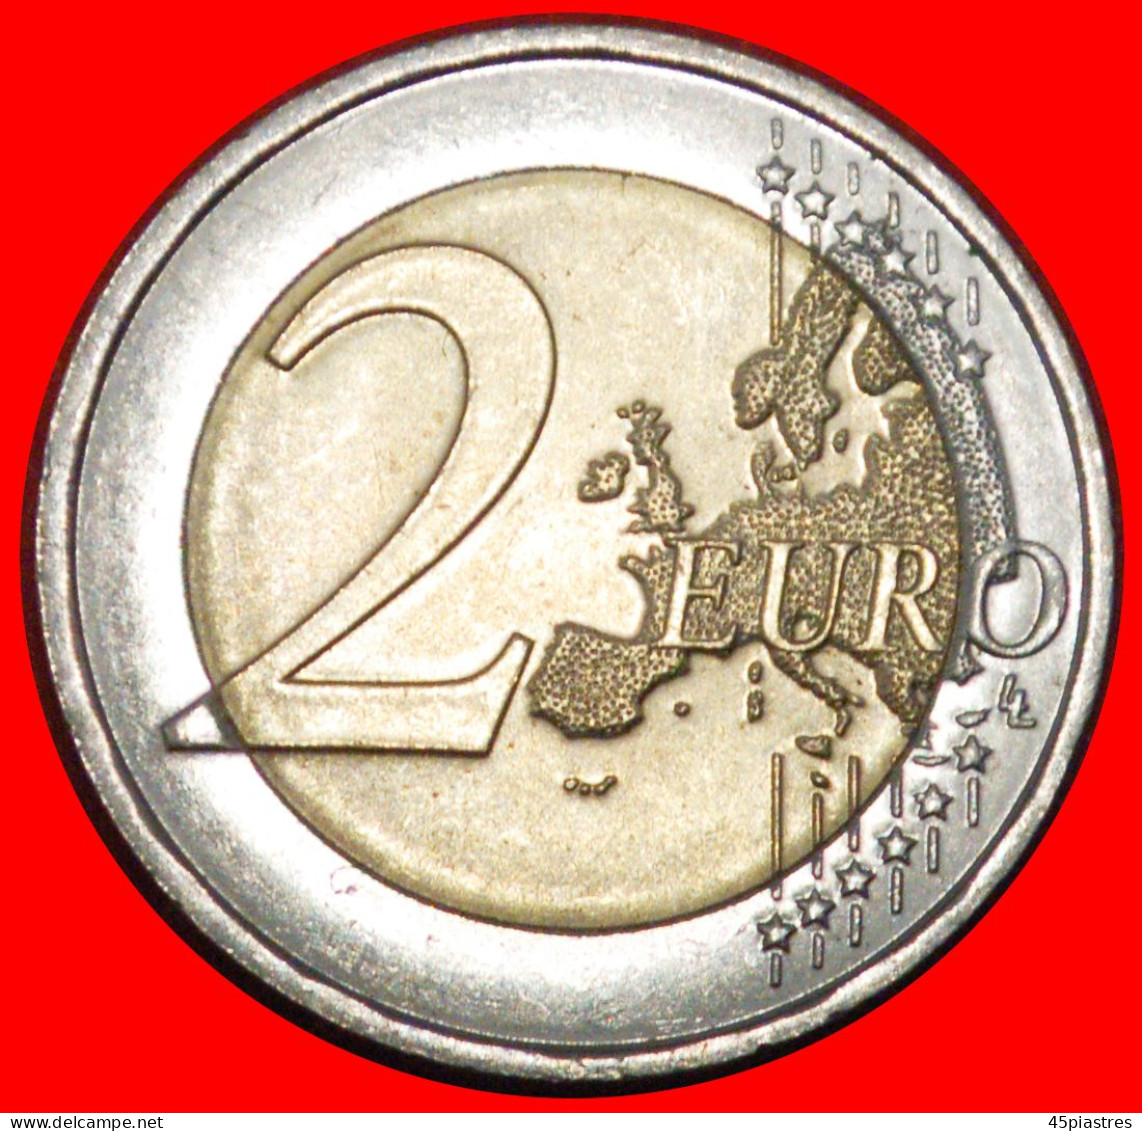 * DOUBLE CROSS 1890-1970: FRANCE  2 EURO 2020! LIBERATION FROM GERMANY! UNC MINT LUSTRE!· LOW START ·  NO RESERVE! - Francia